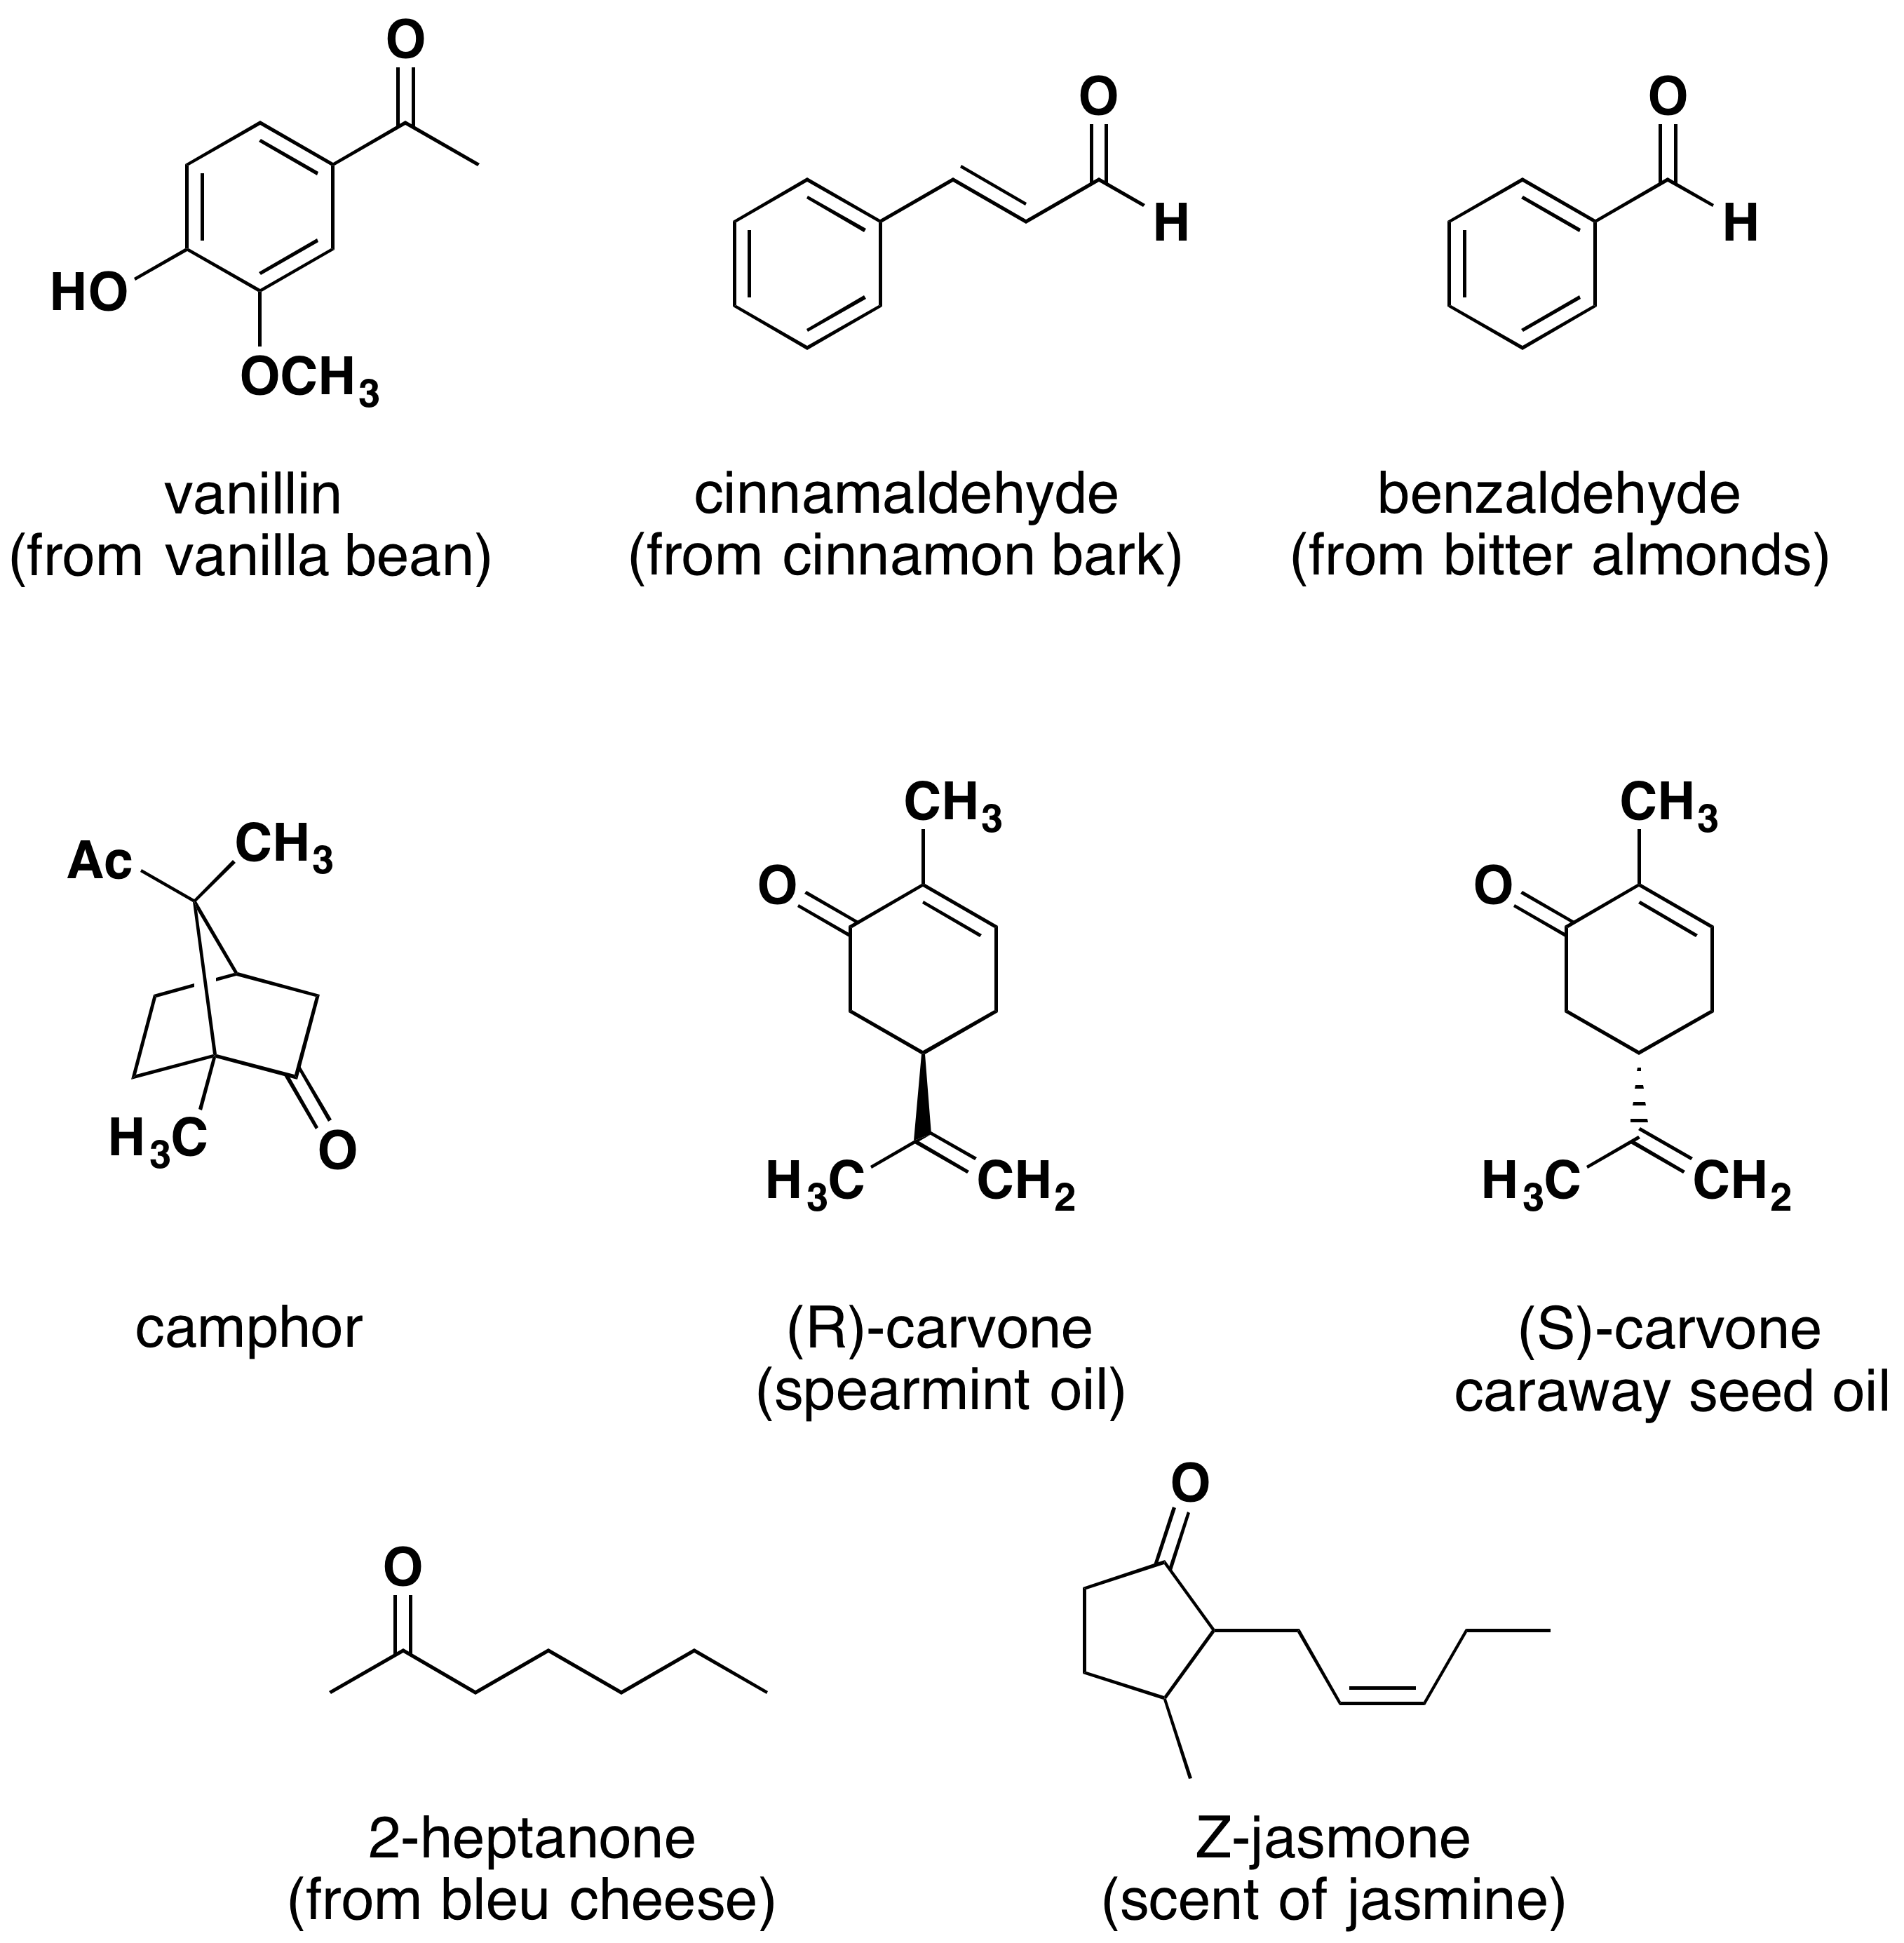 carbonyl group structure